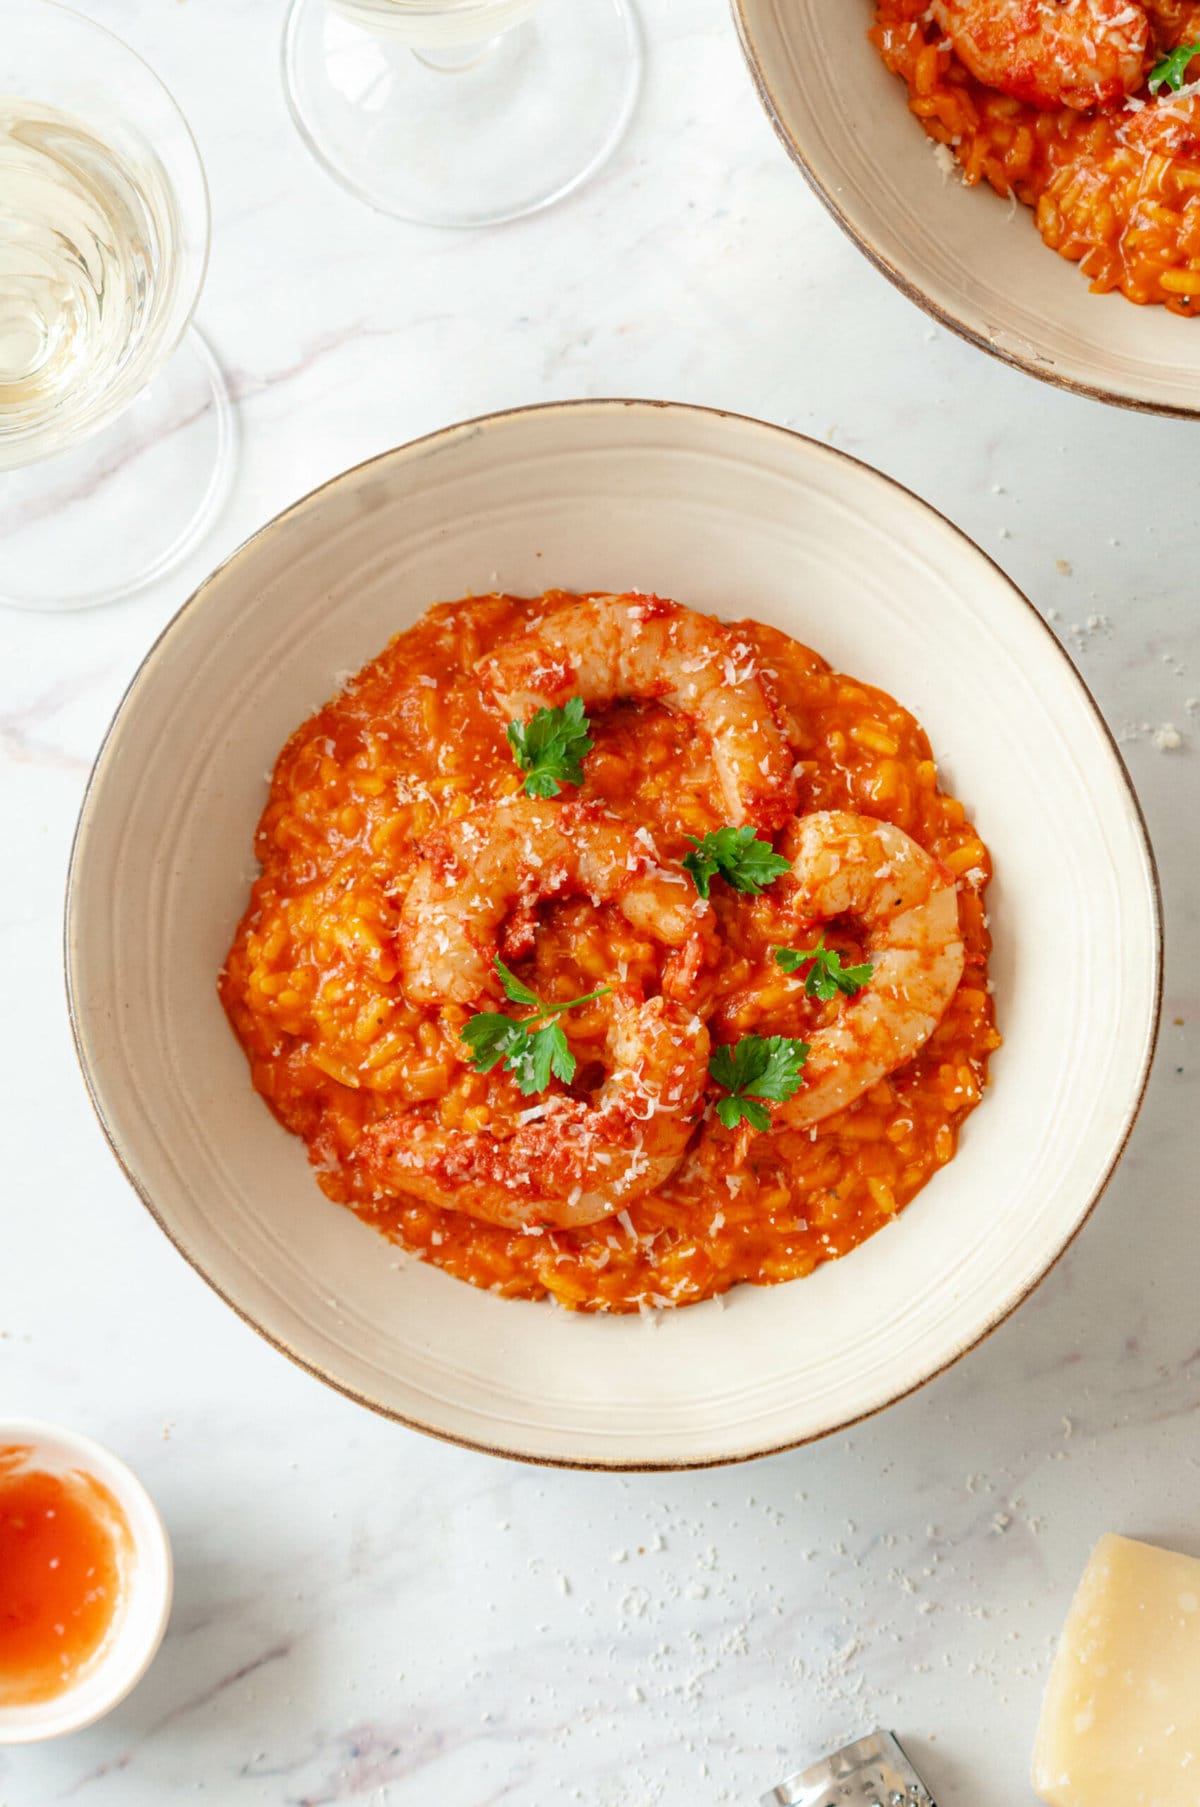 Tomato risotto with spicy shrimps